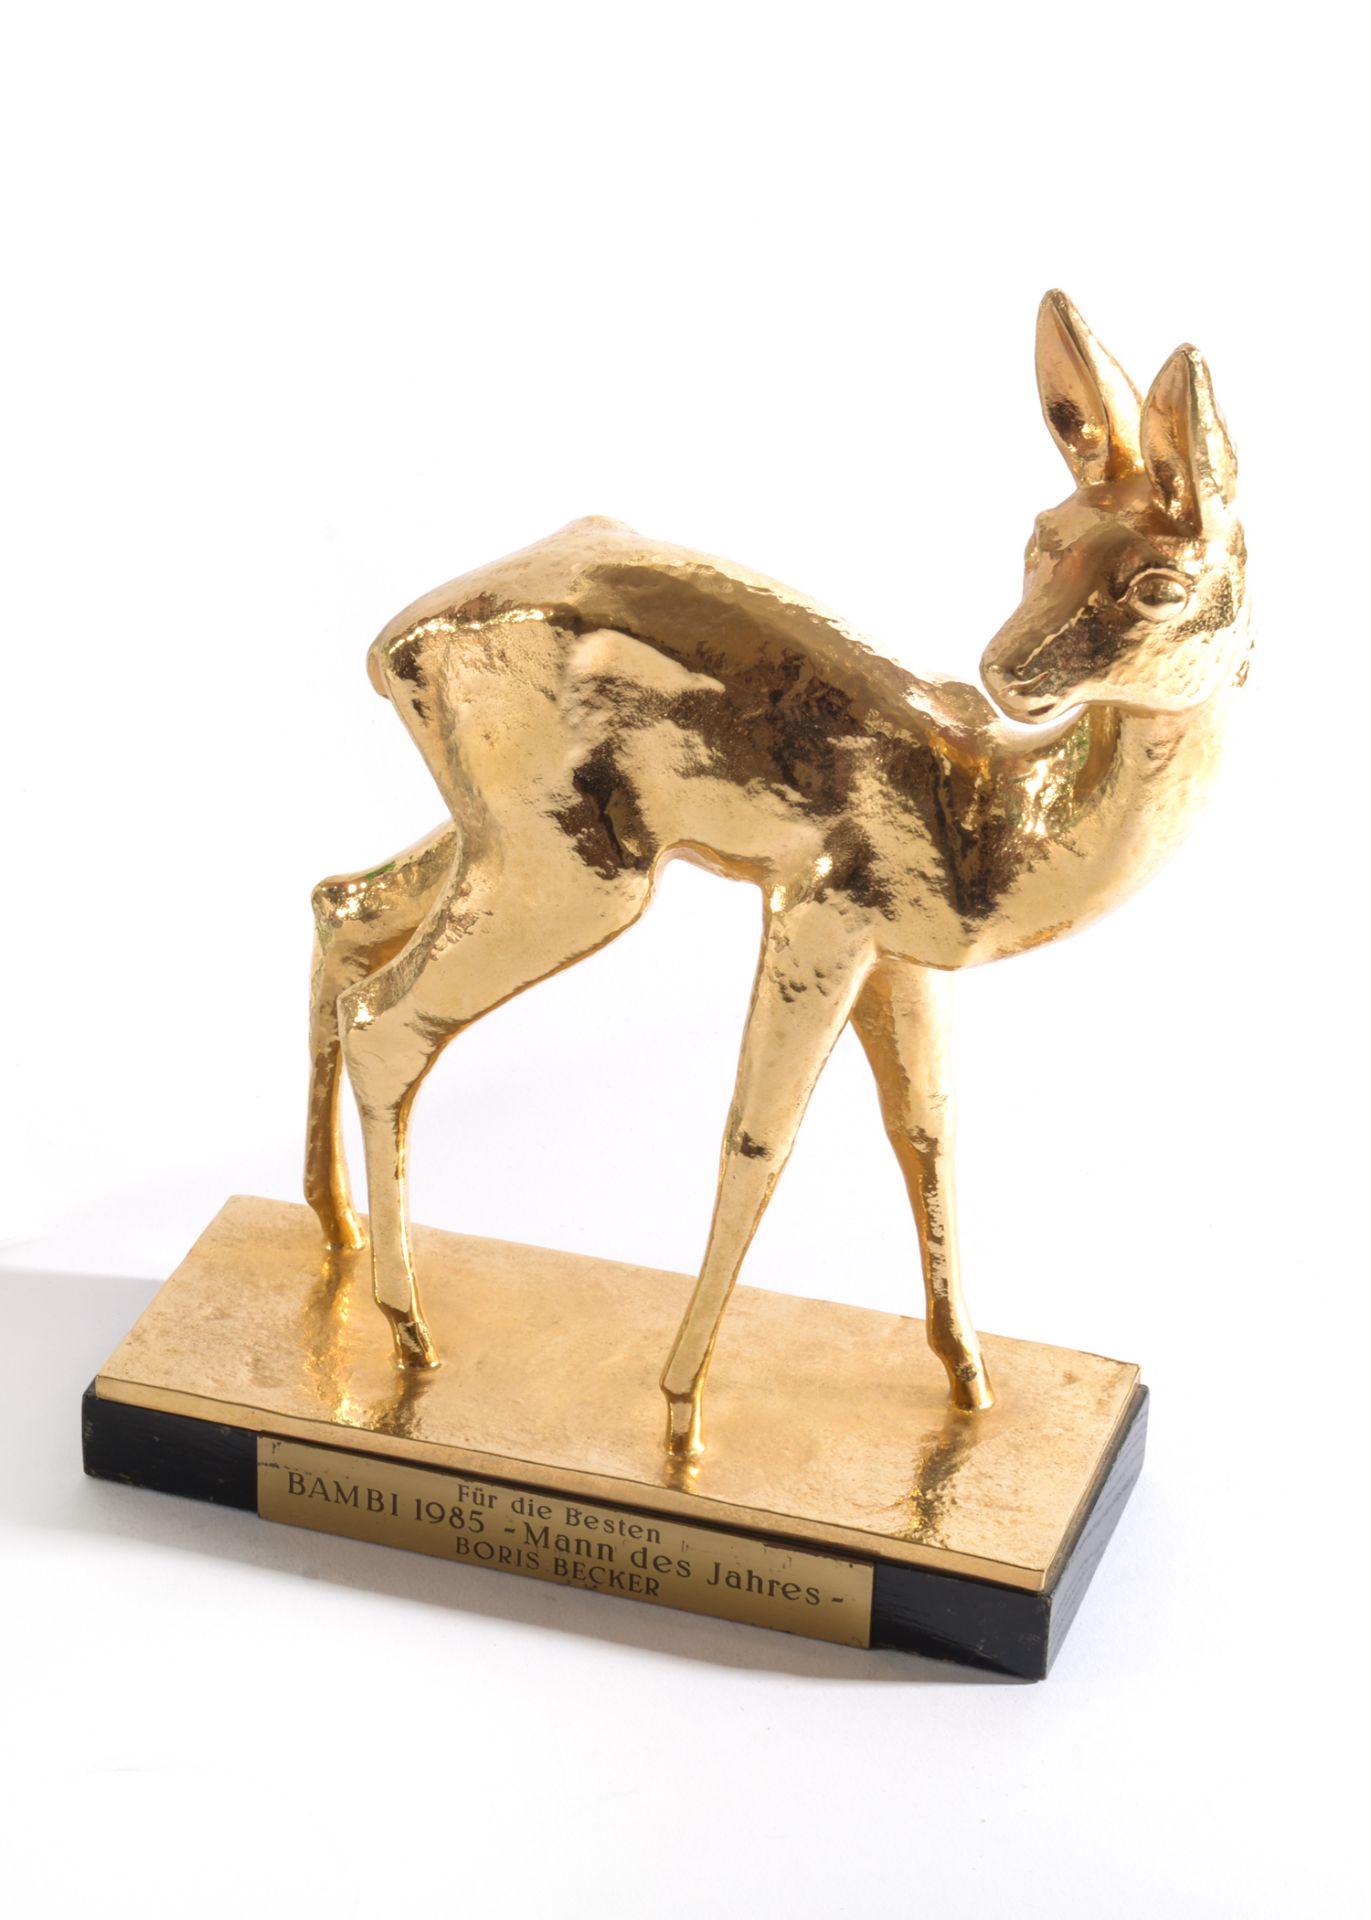 A Metal Figurine of a Fawn on a Wooden Plinth with a Plaque engraved with the words Fur Die Besten - Image 2 of 3